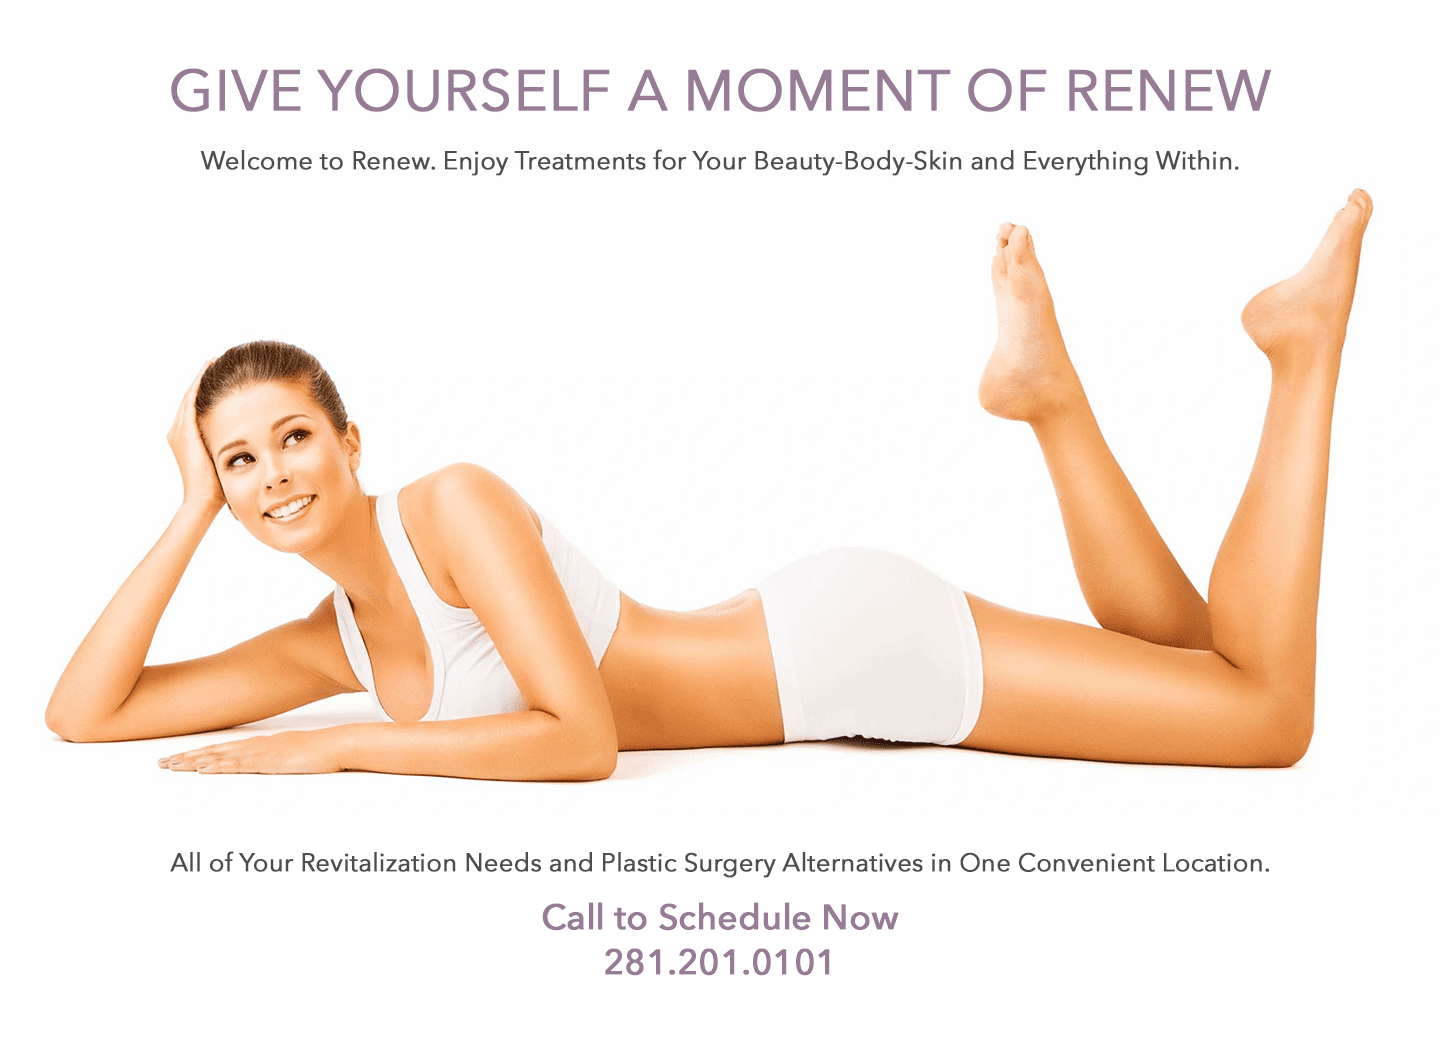 Cellulite Removal and Facial Skin Tightening at Renew Body Contouring